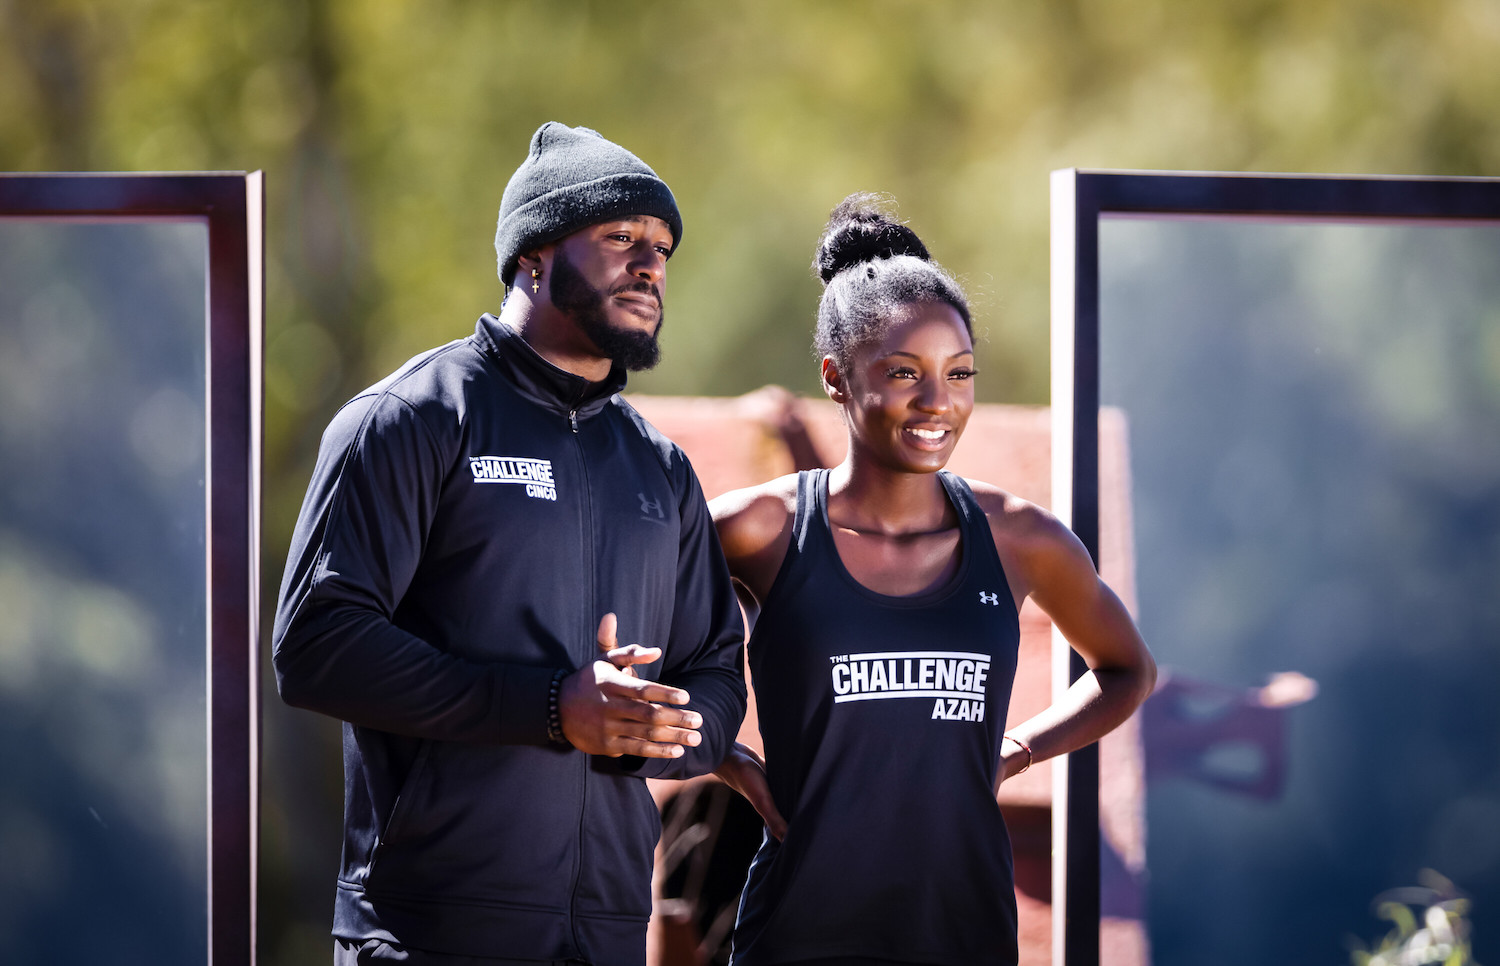 'Cinco' Holland Jr. and Azah Awasum in 'The Challenge: USA' episode 5